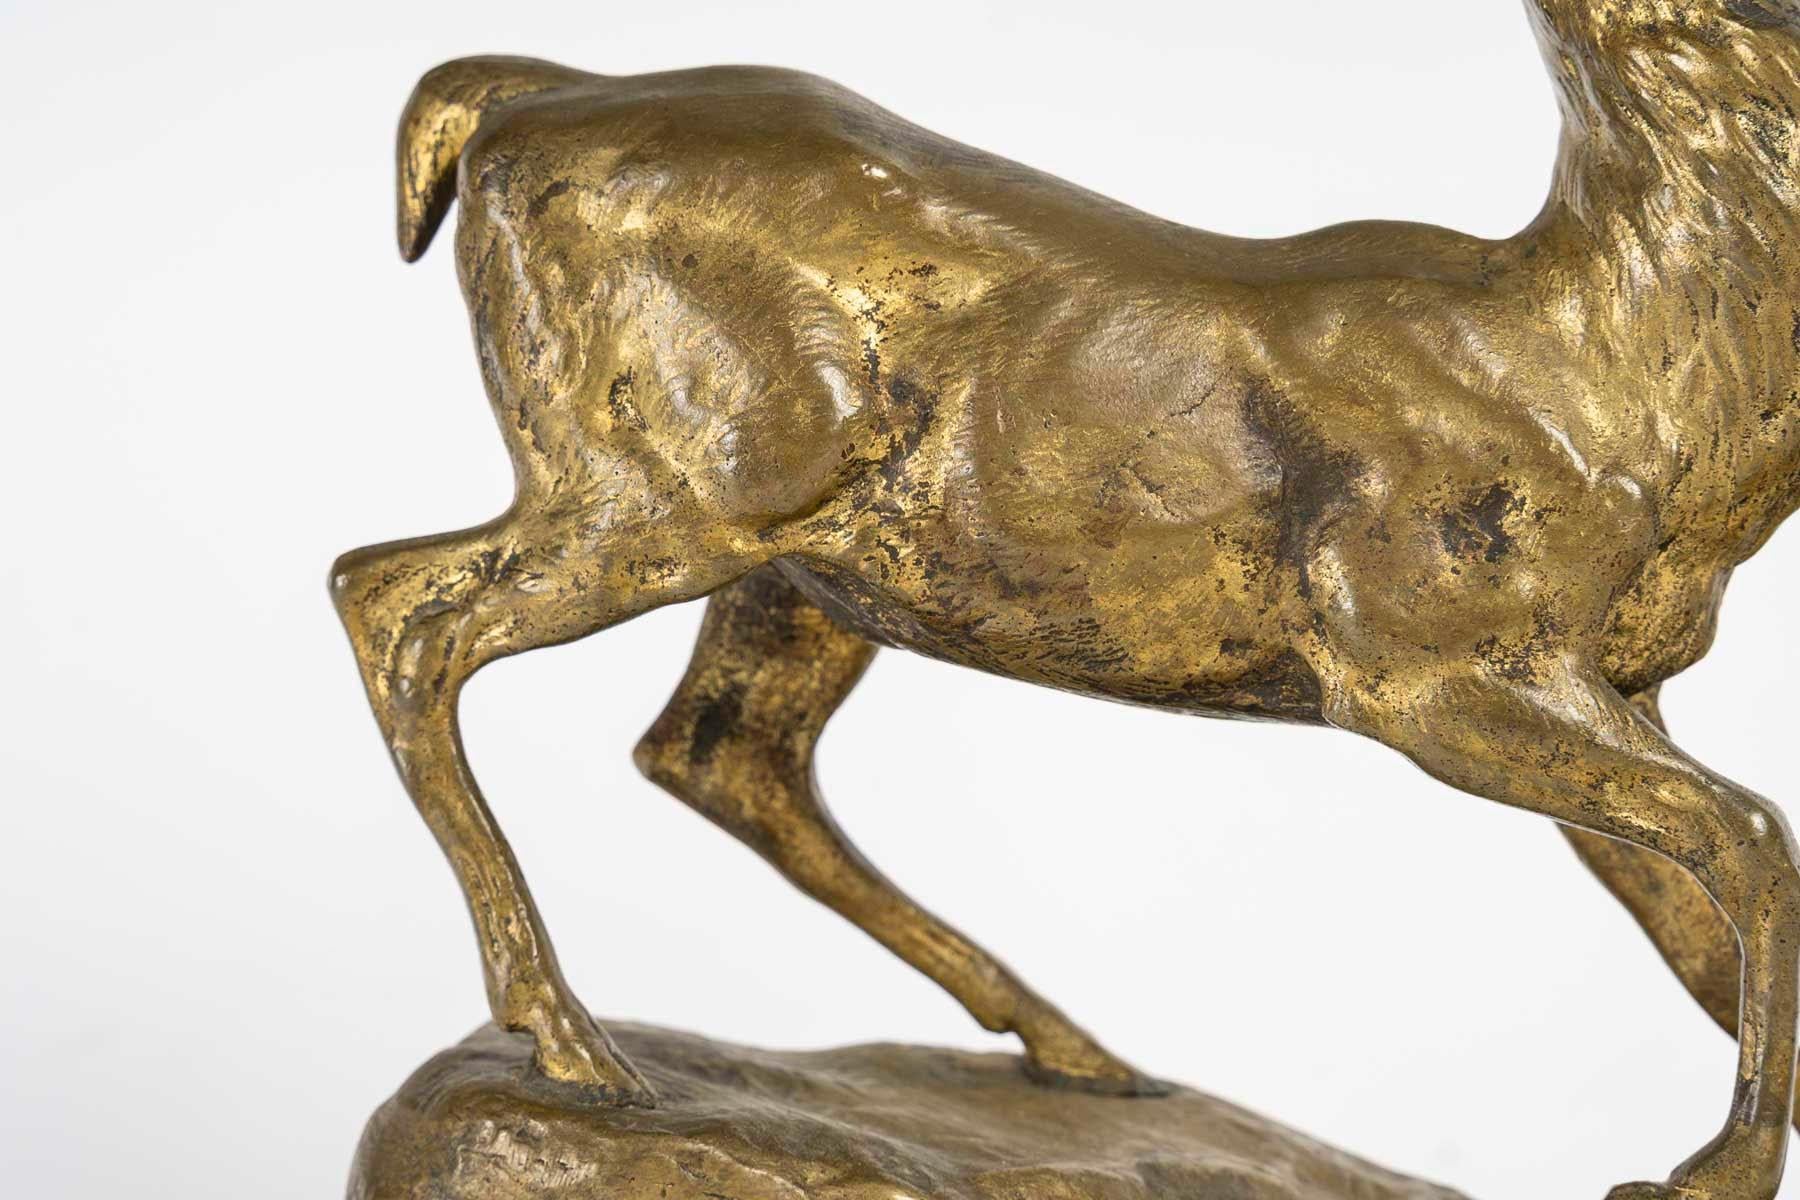 French Sculpture of a Stag in Freedom by Aignon, Sculptor, Napoleon III Period. For Sale